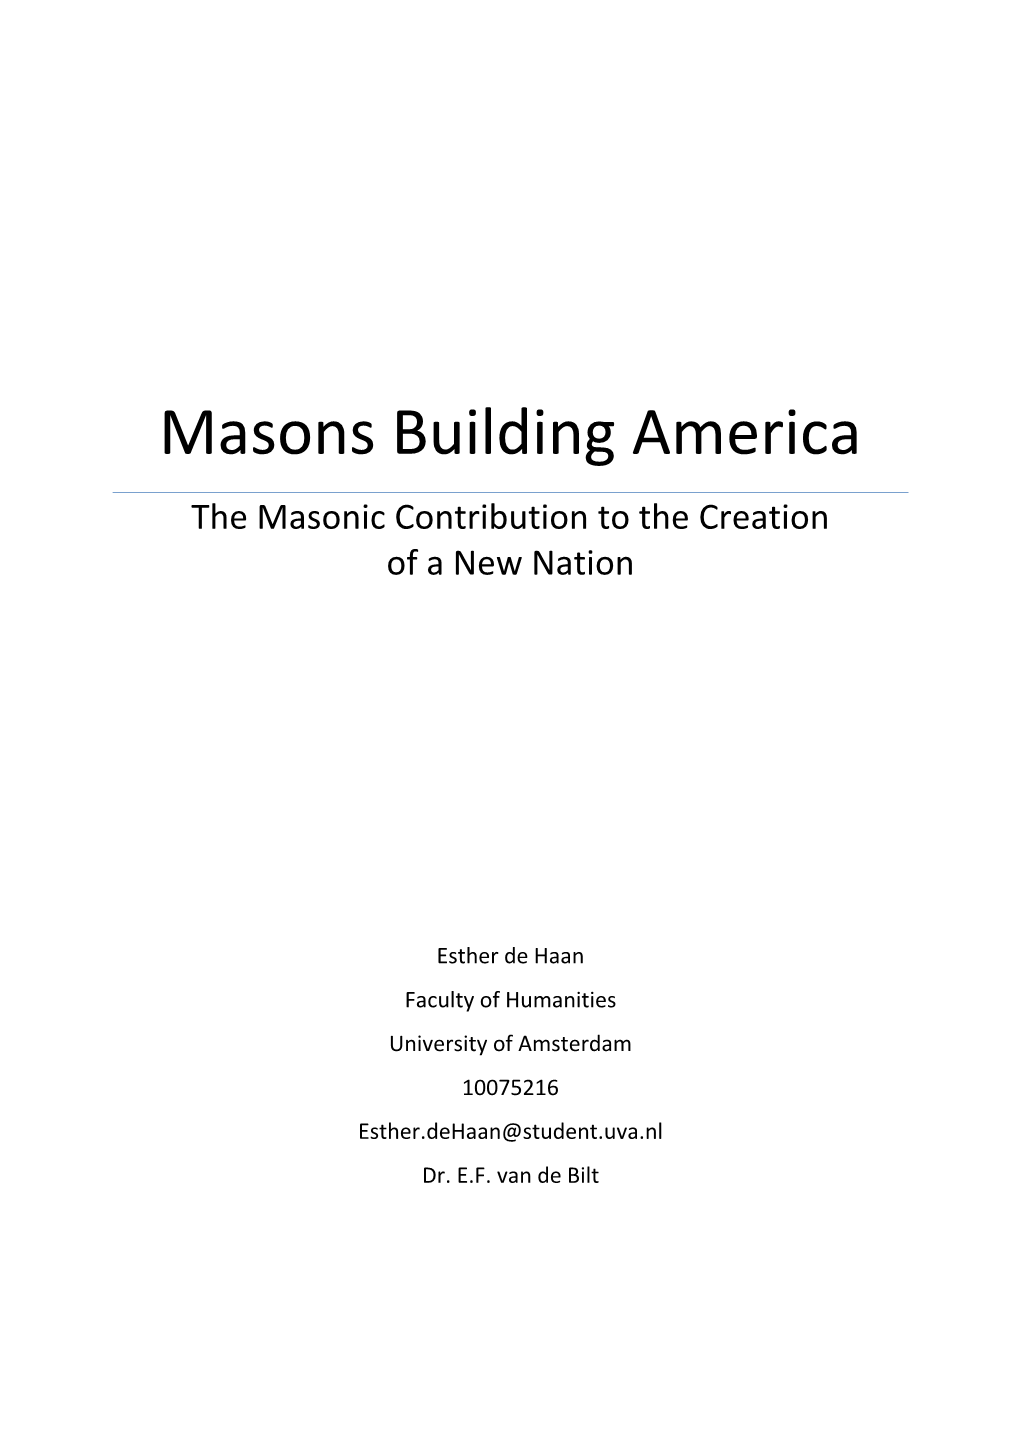 Masons Building America the Masonic Contribution to the Creation of a New Nation